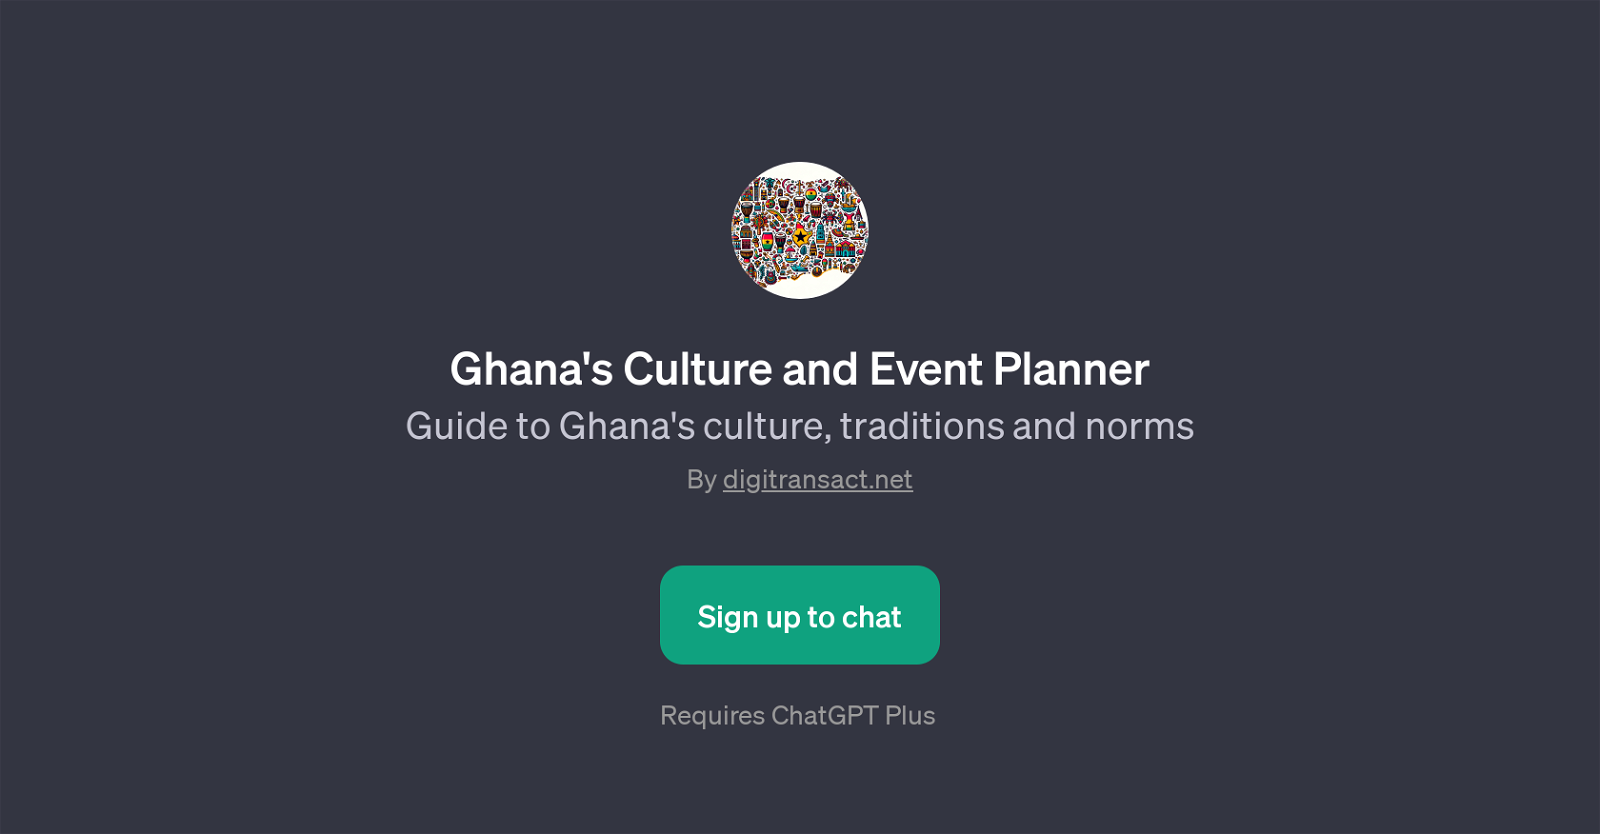 Ghana's Culture and Event Planner website